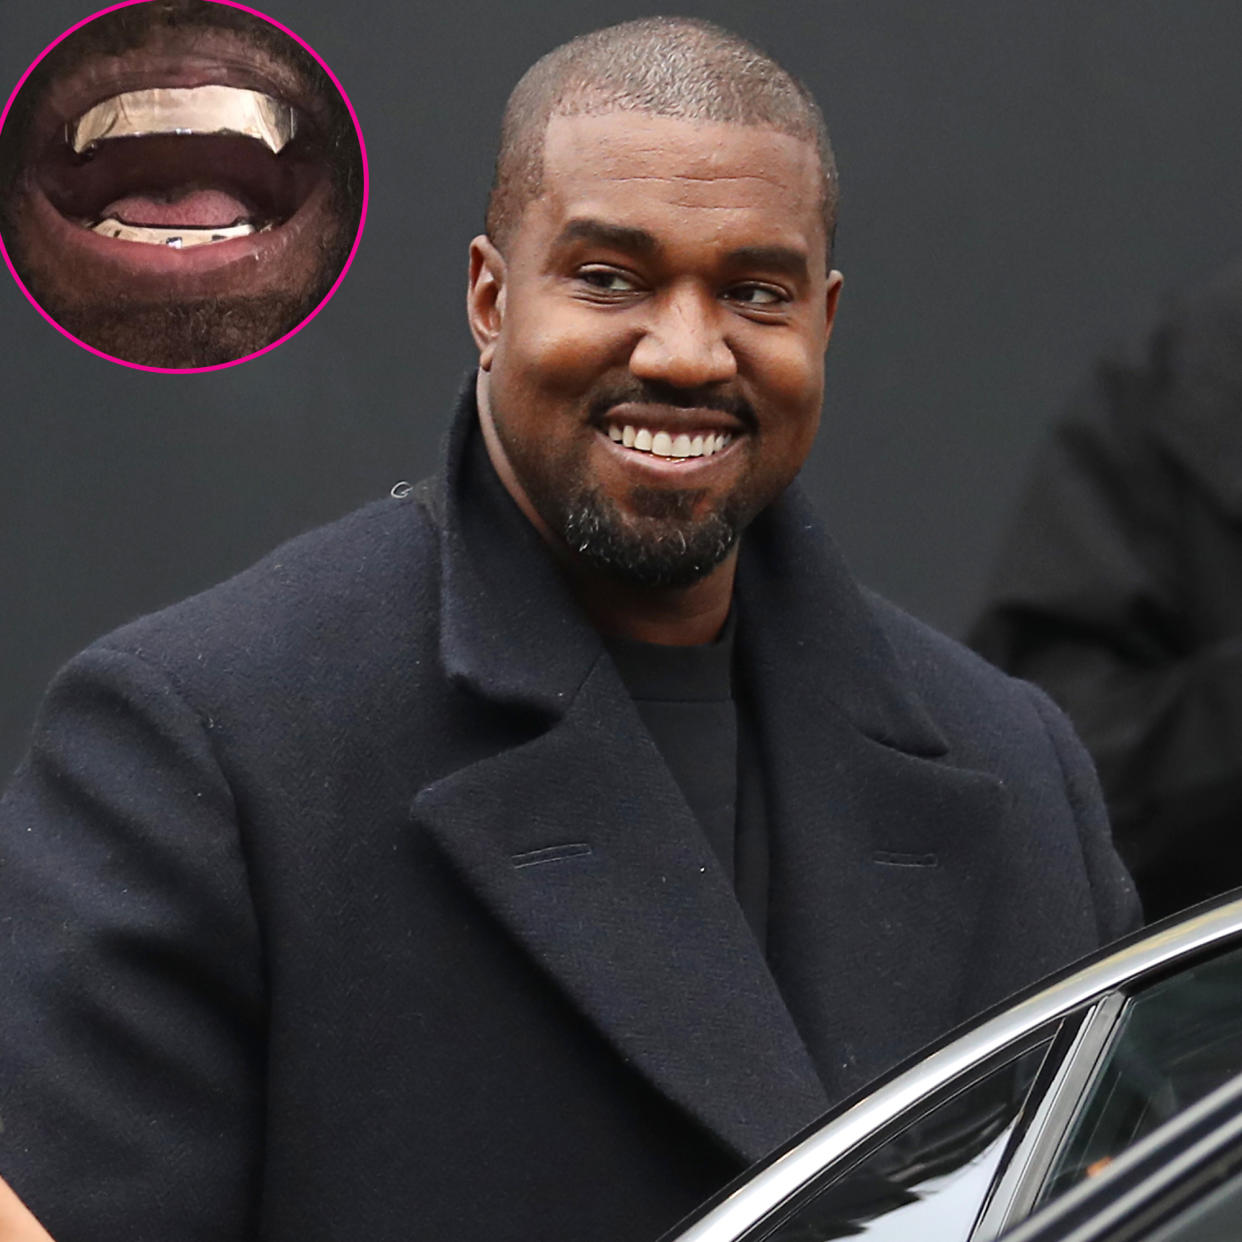 Kanye West Shows Off $850,000 Titanium Grill Inspired by James Bond Villain